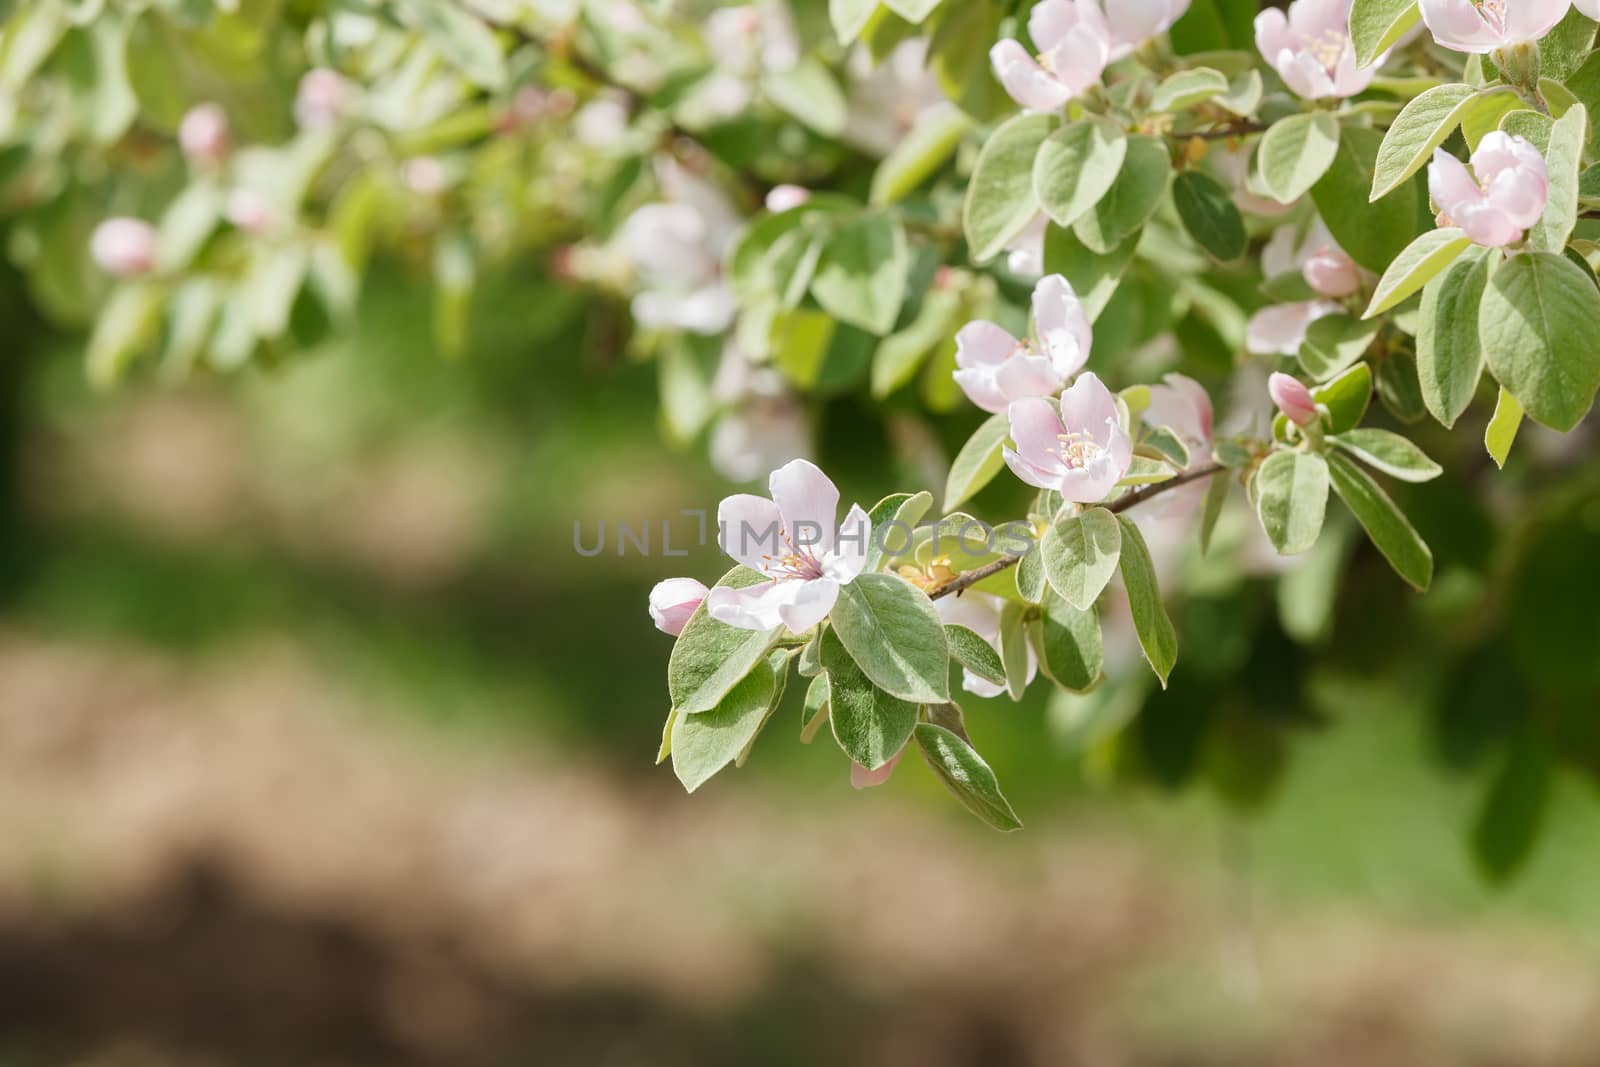 Flowers and buds on spring quinces trees in orchard.Natural blurred background.